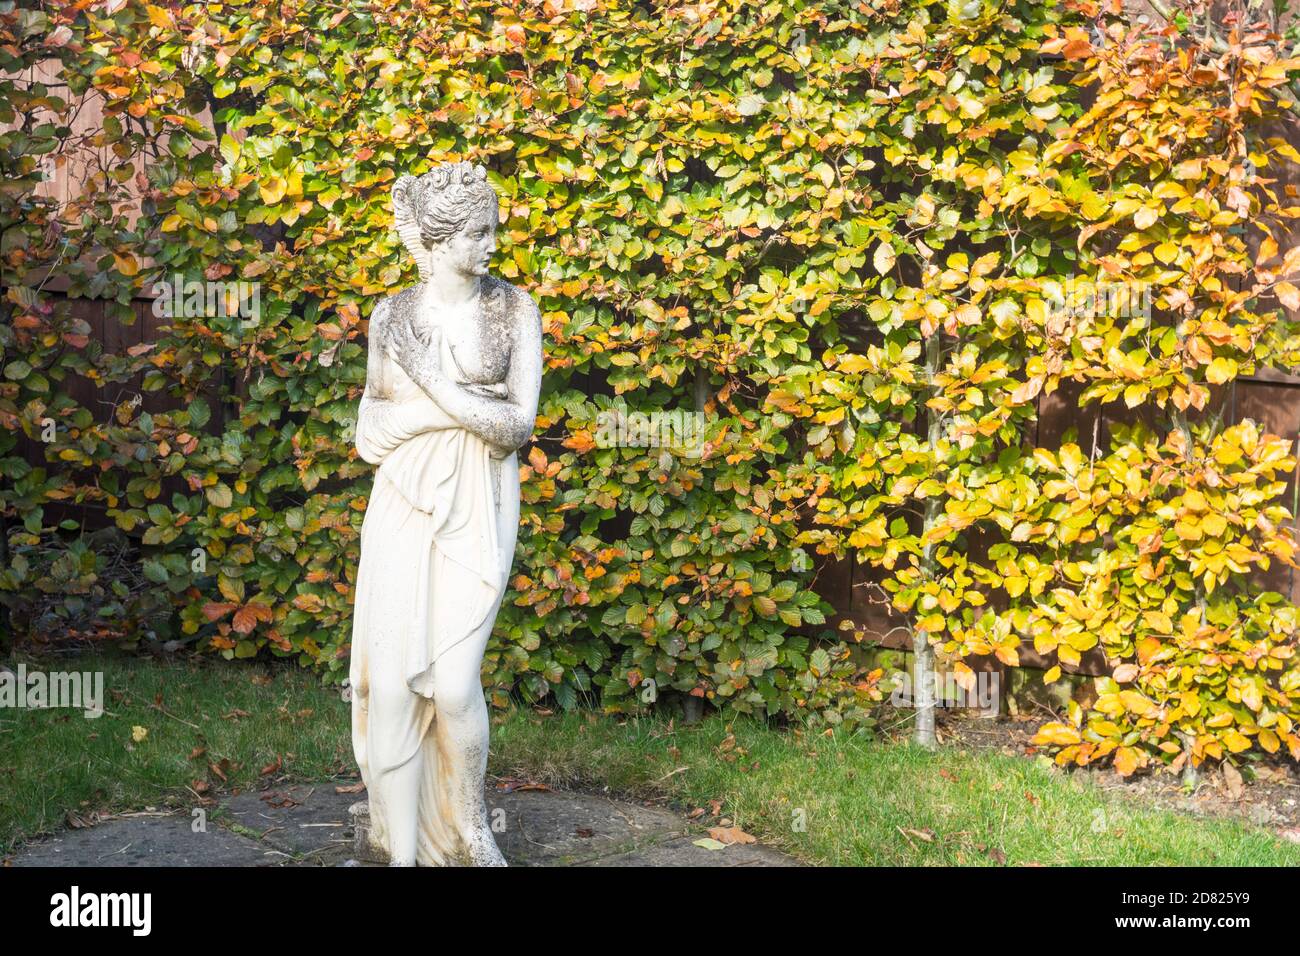 A statue of a female before a beech hedge (Fagus sylvatica) in autumn within a domestic garden, UK Stock Photo